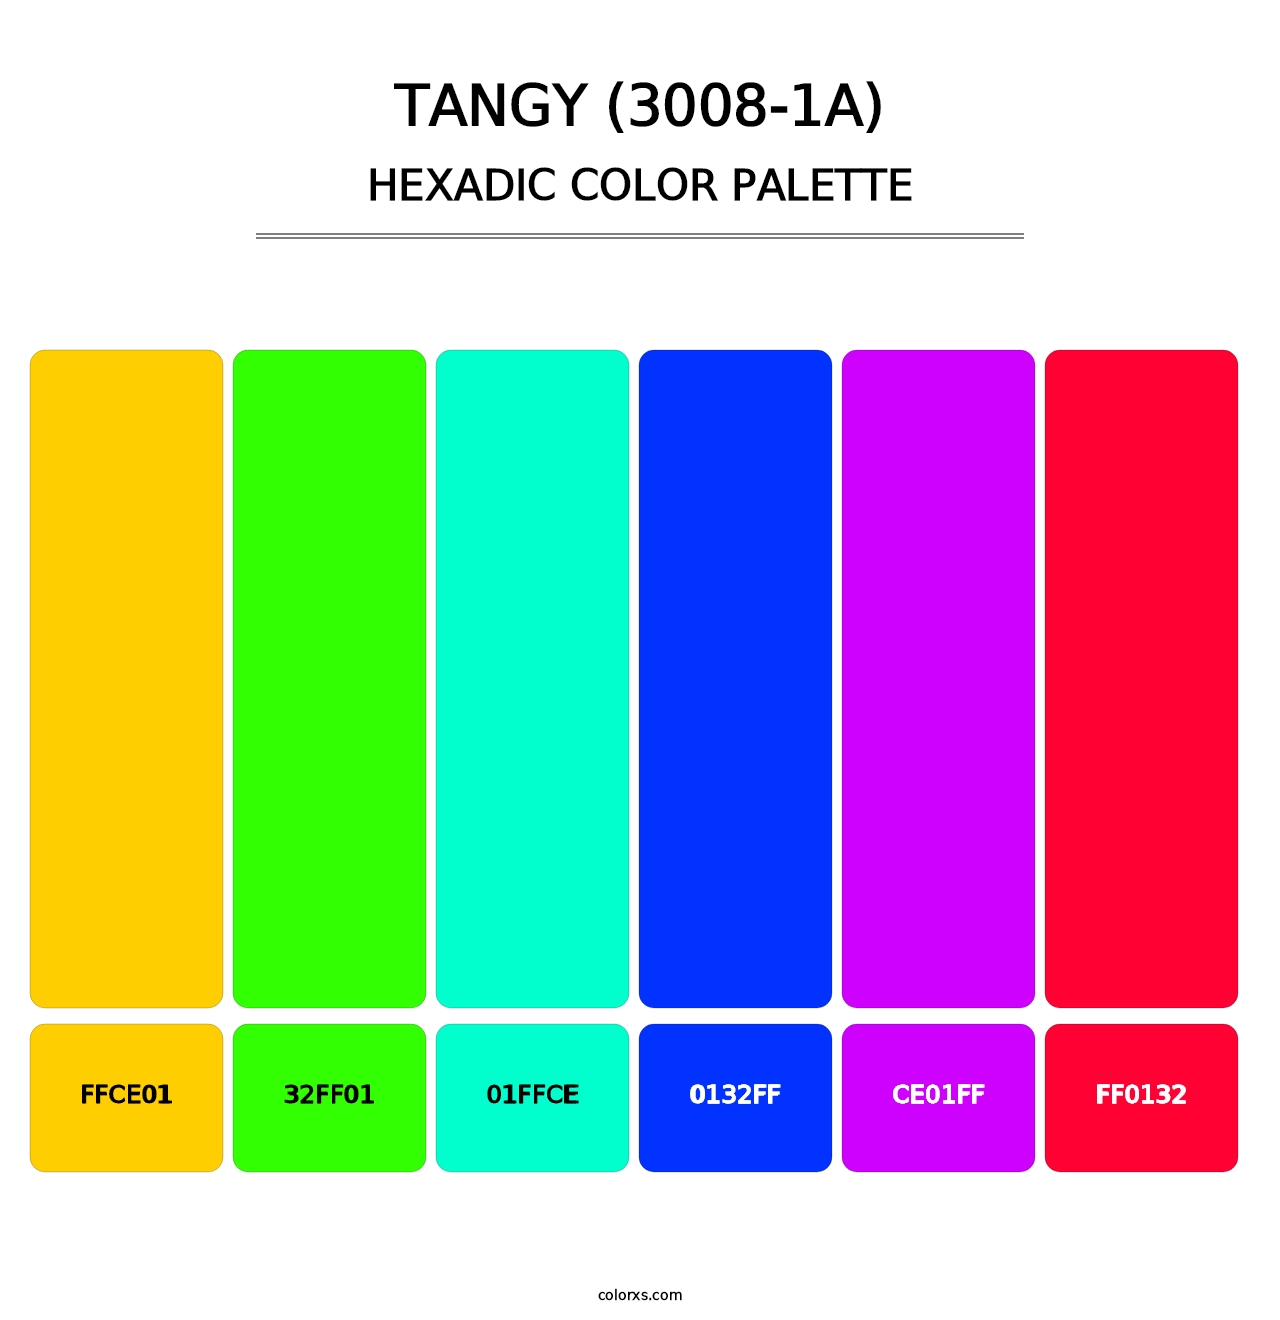 Tangy (3008-1A) - Hexadic Color Palette